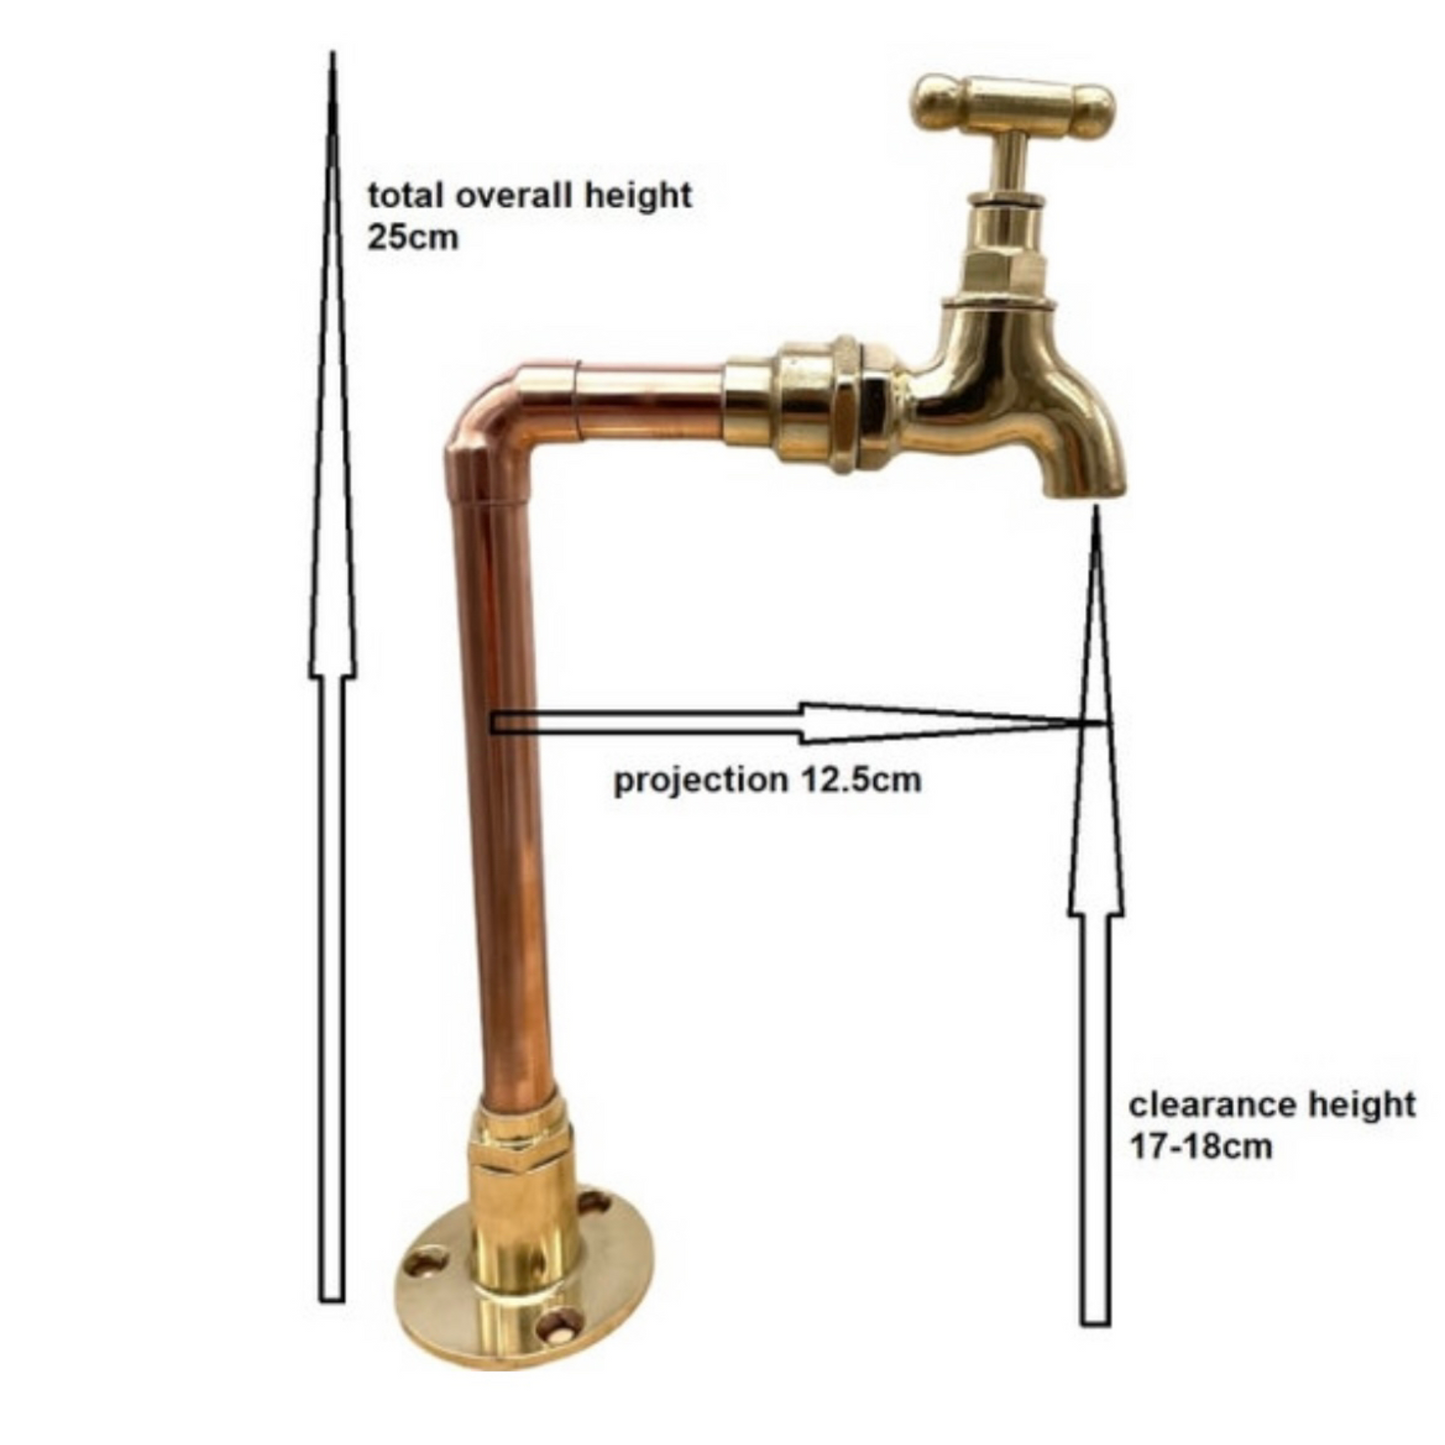 image of copper and brass hand made taps measurements sold by All Things French Store